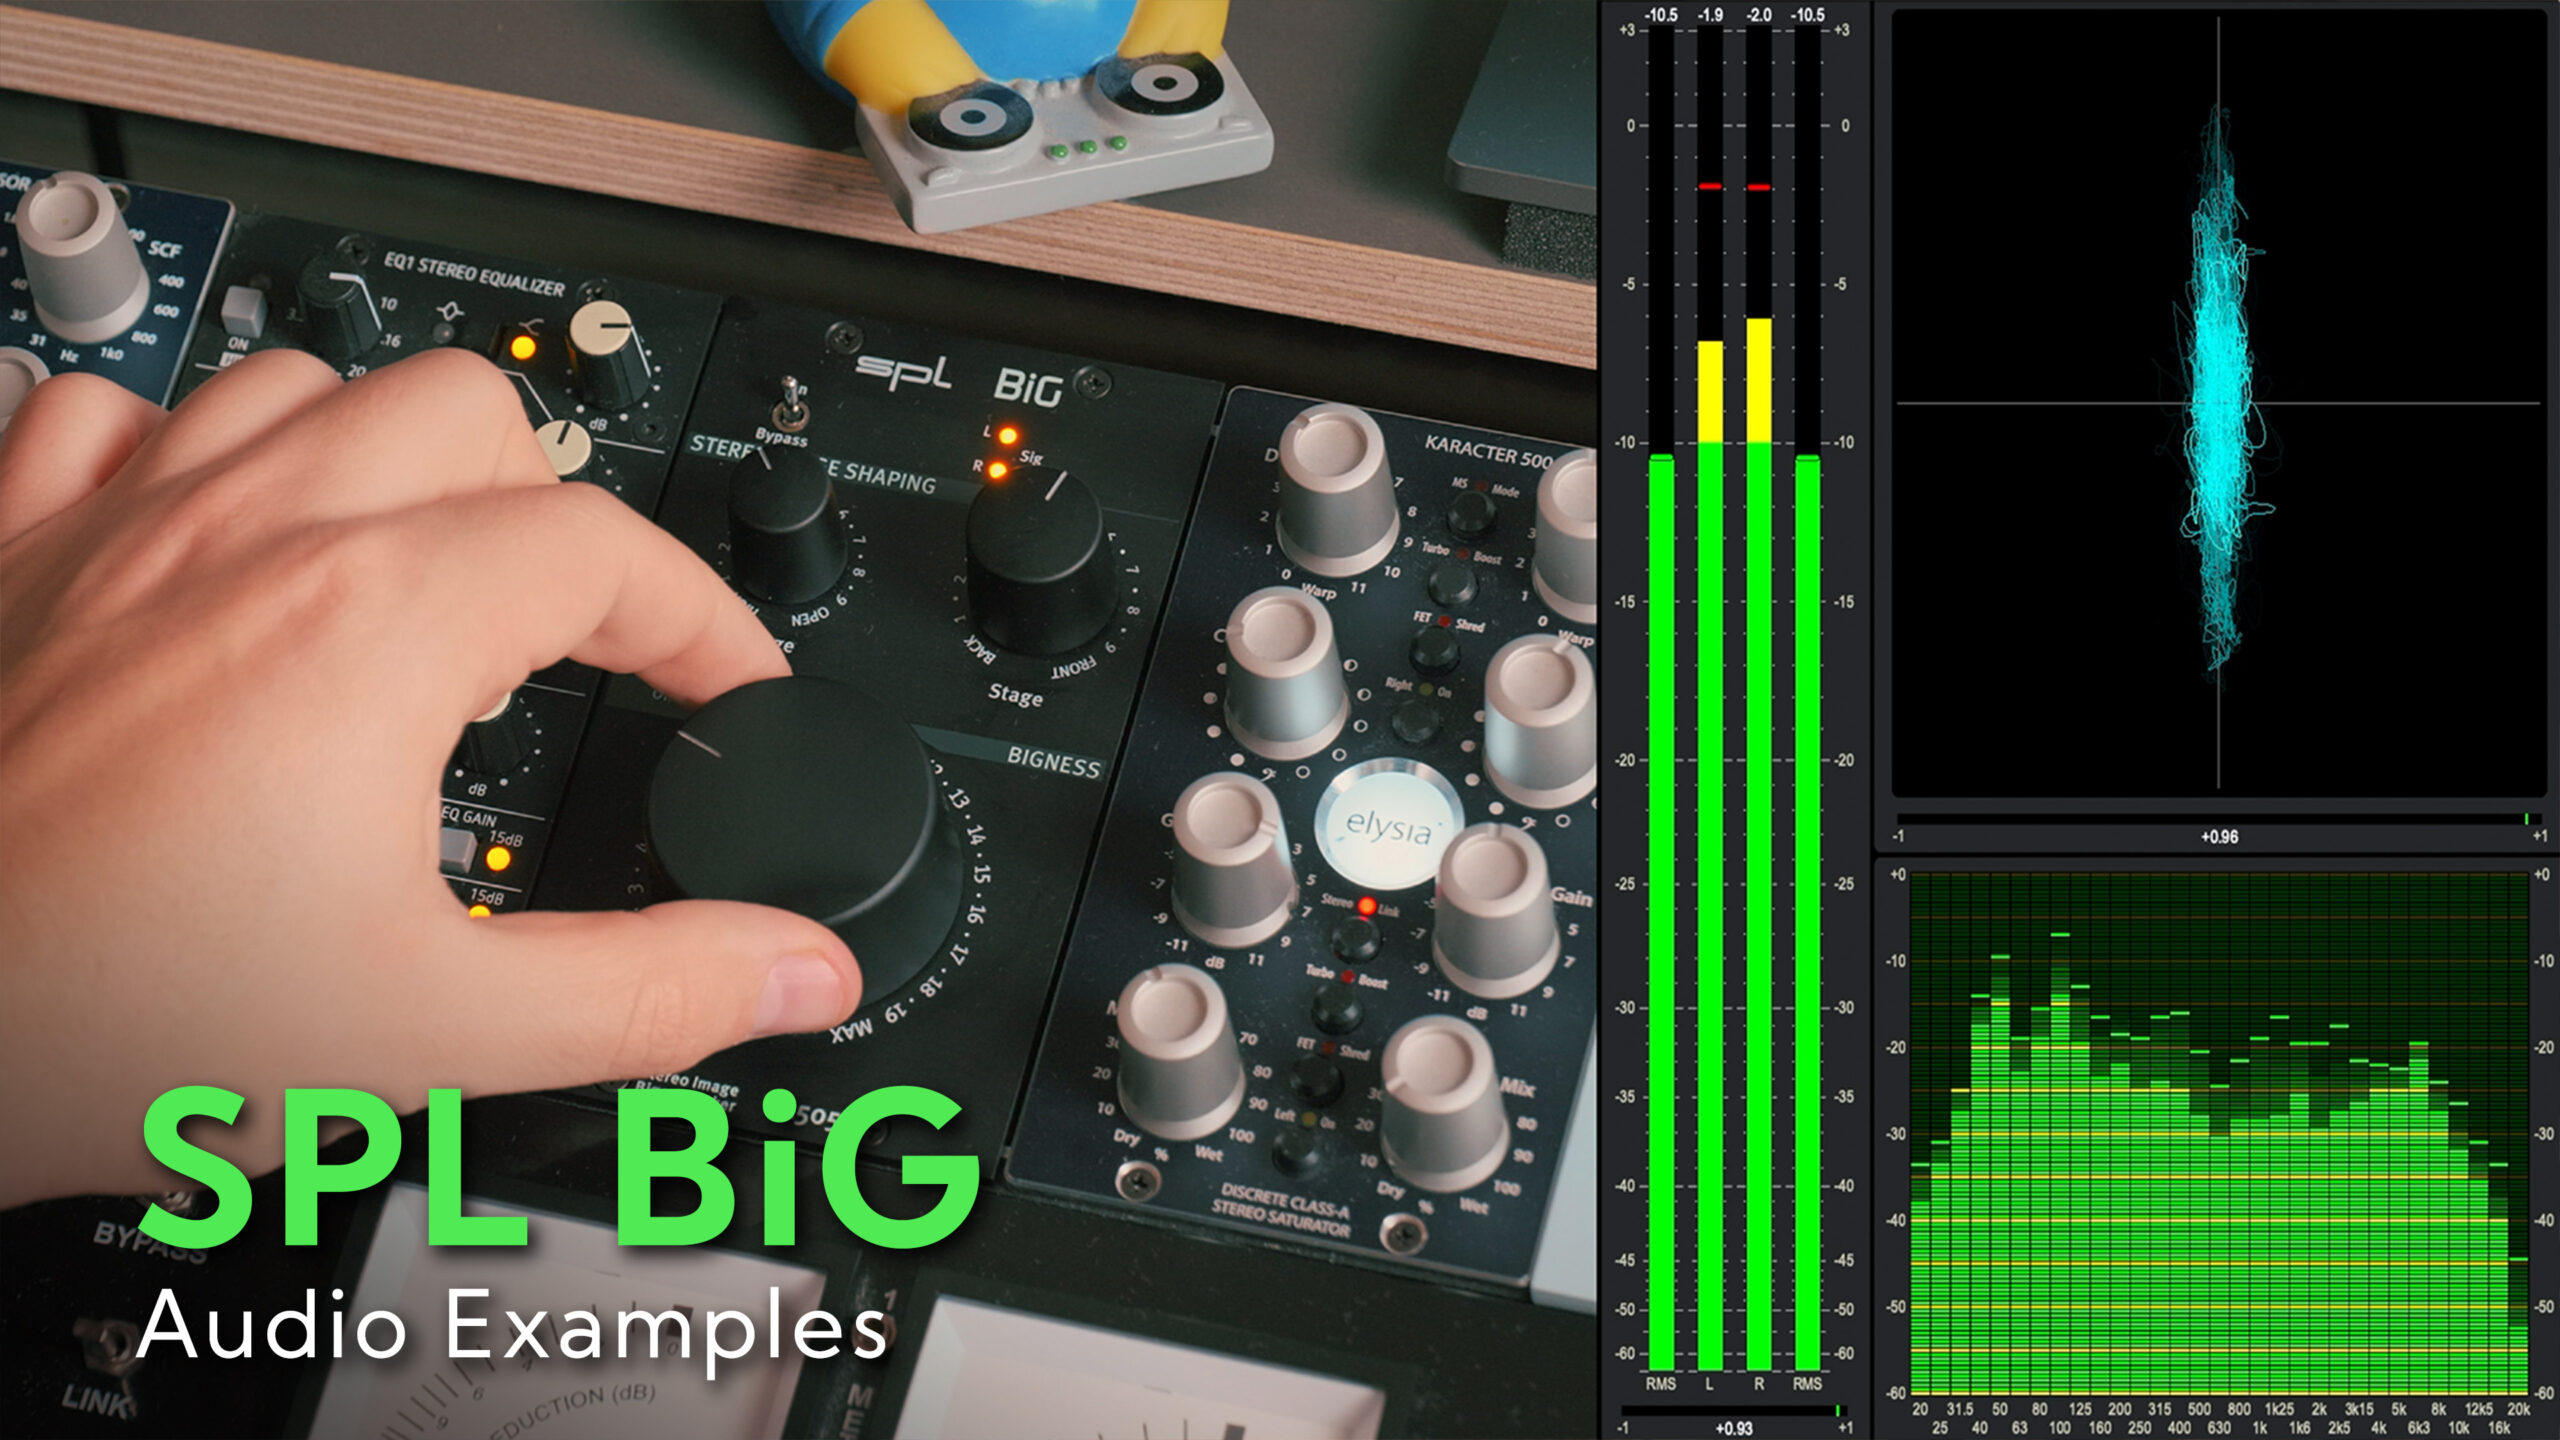 Stereo Width Audio Processing | SPL BiG Audio Examples